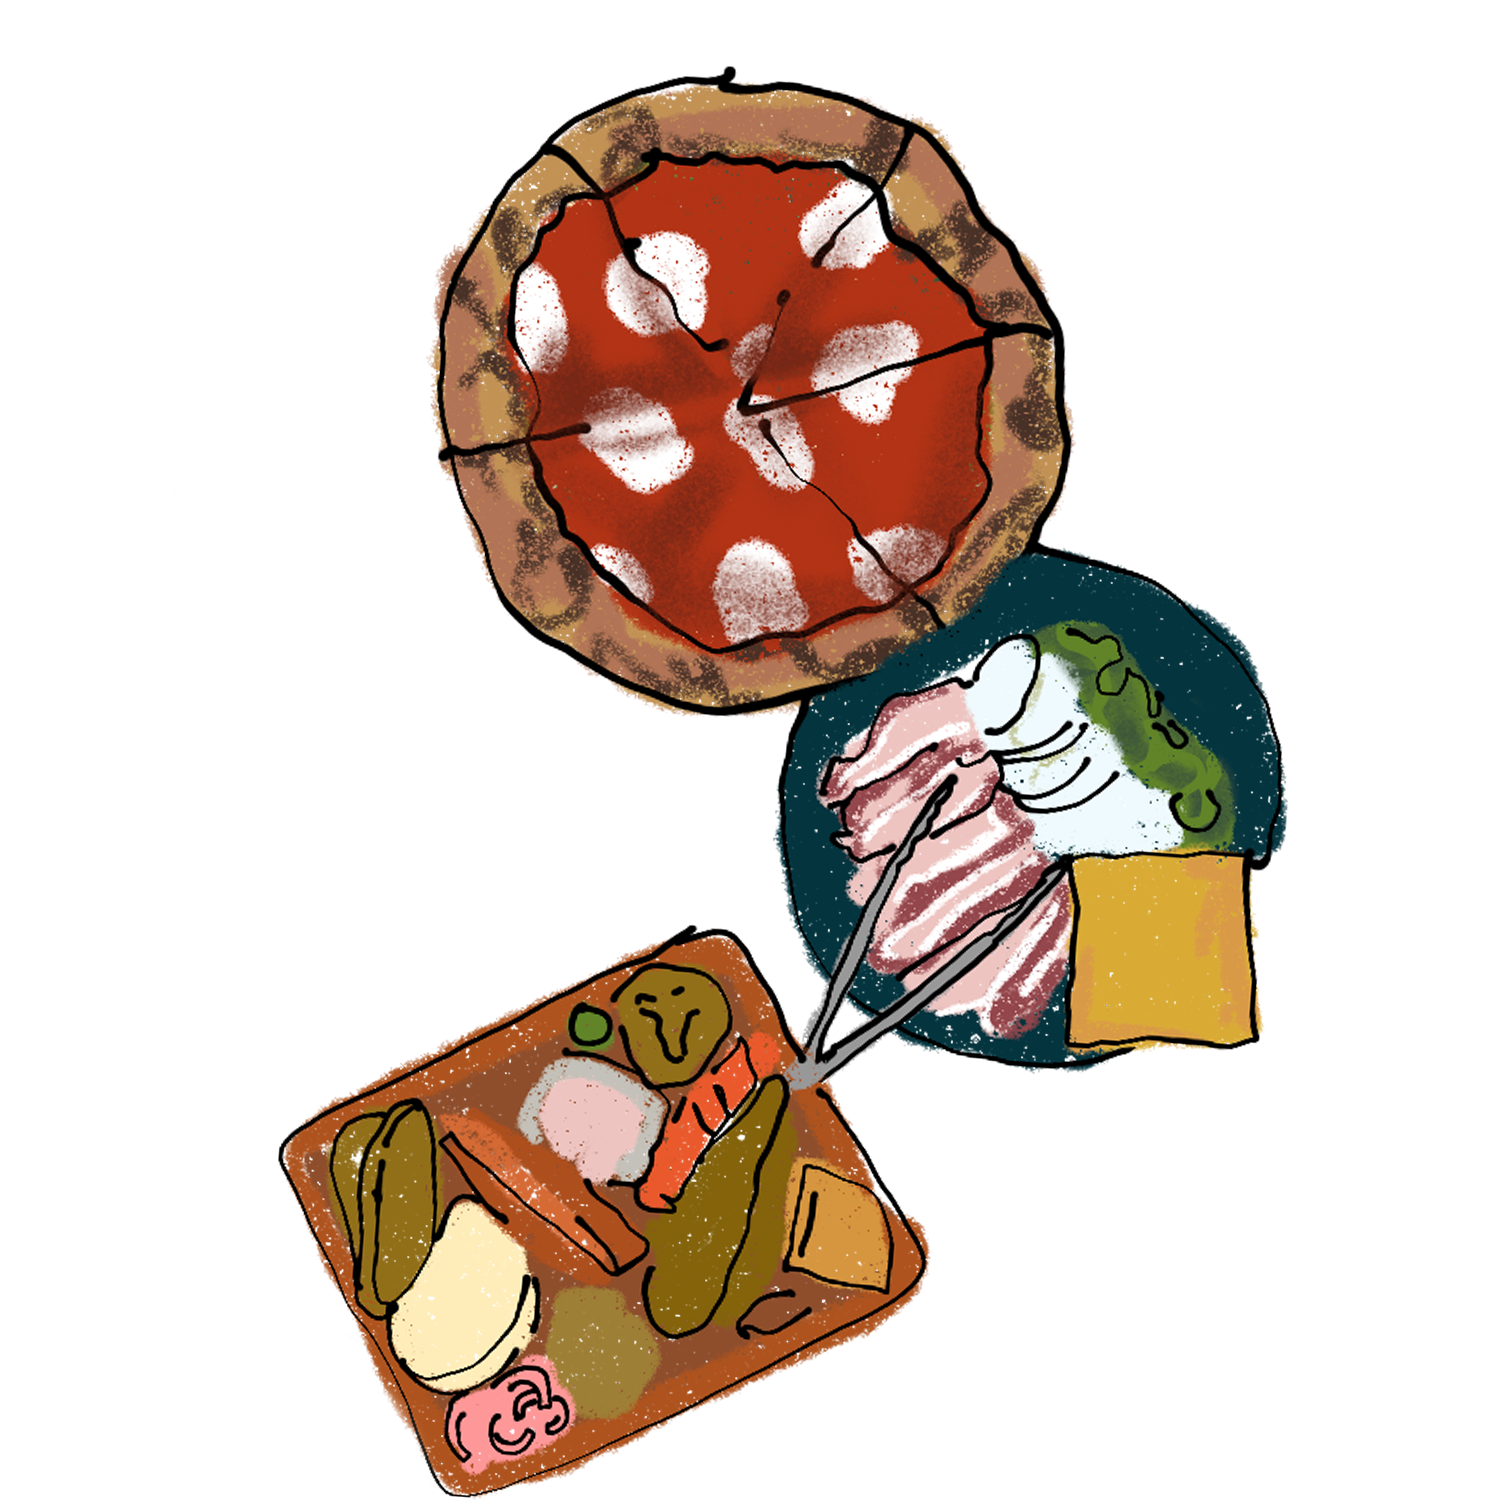 illustration of pizza, fish, and barbecue from Charleston to Savannah